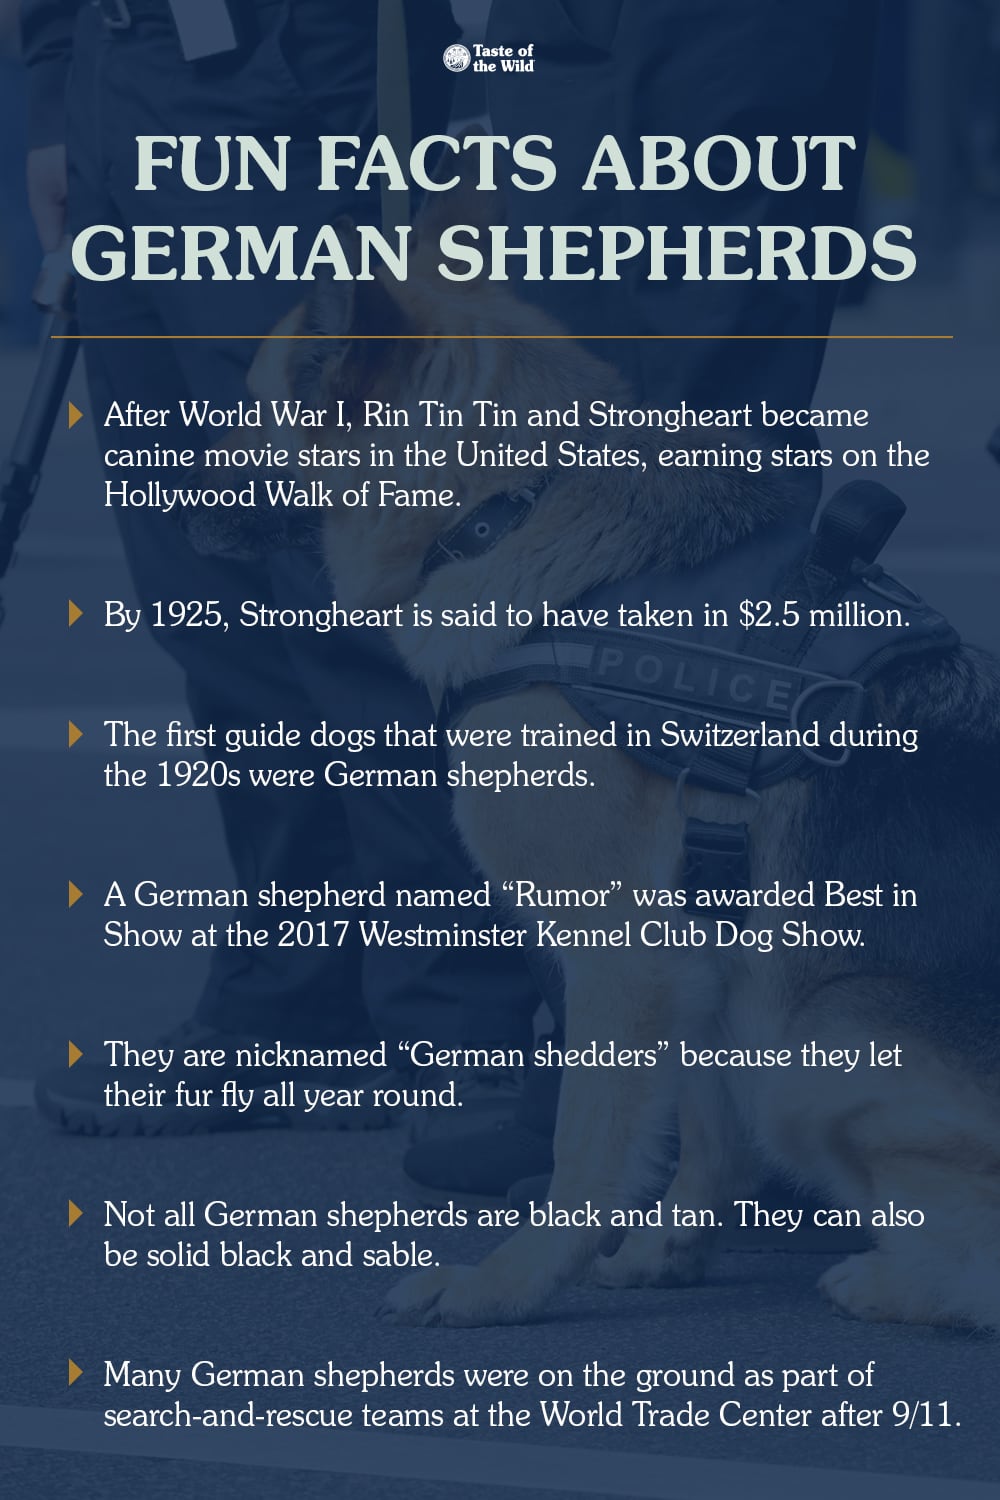 Fun Facts About German Shepherds List | Taste of the Wild